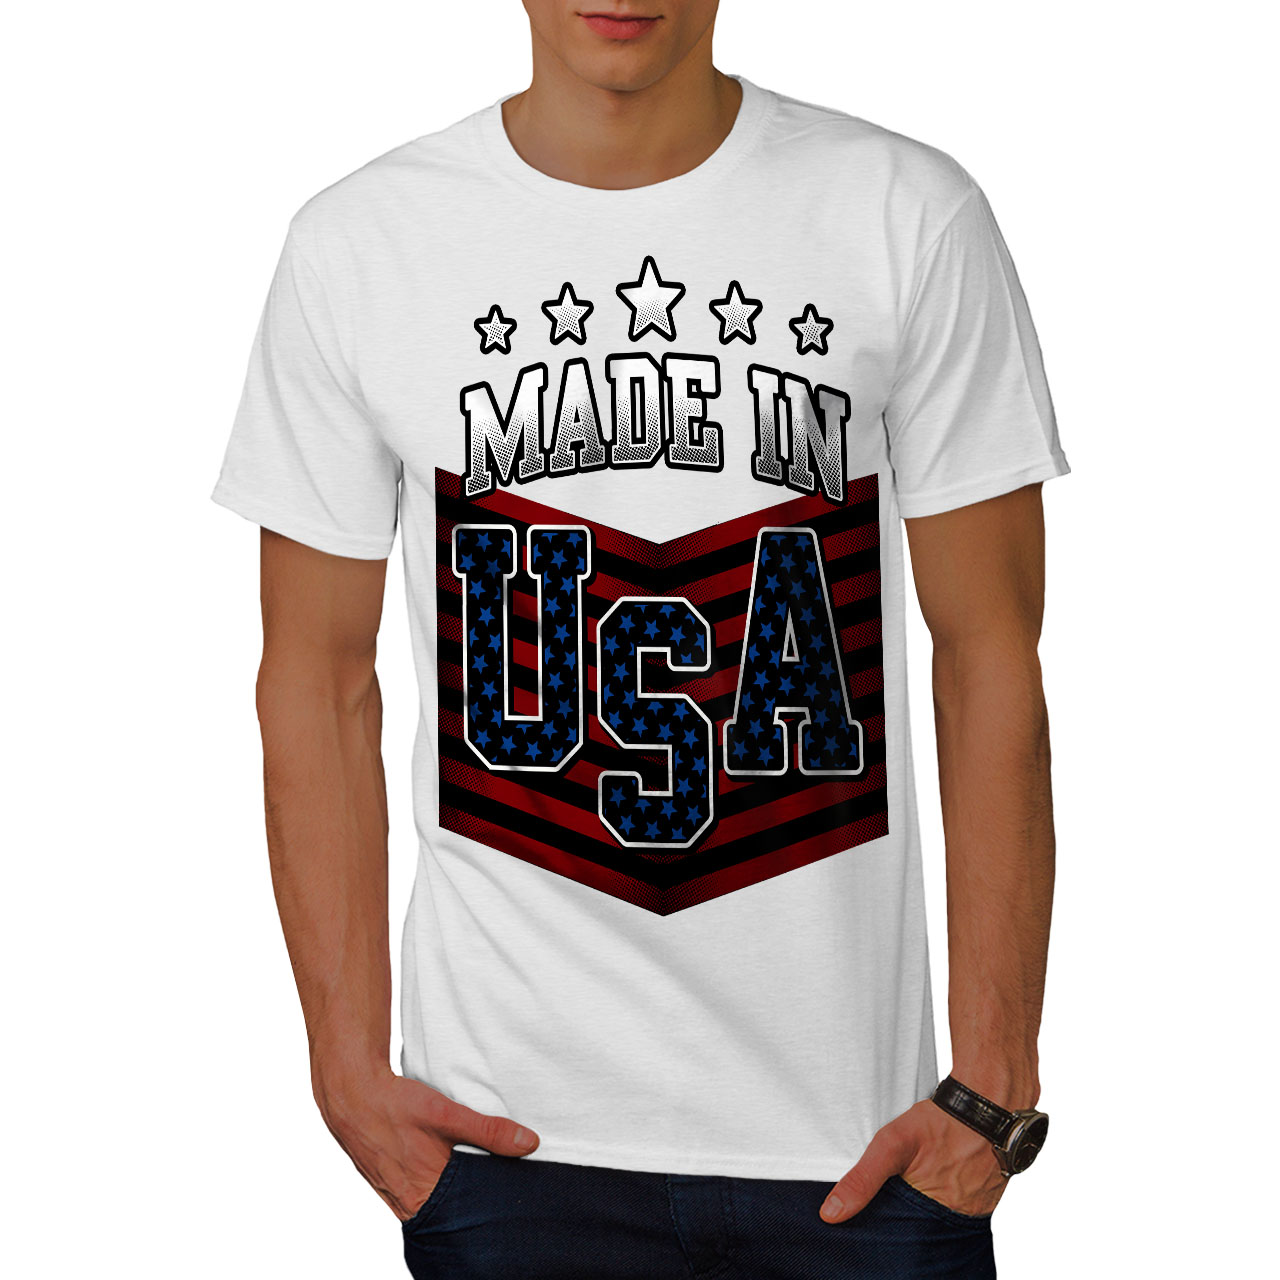 Patriot Graphic Design Printed Tee Wellcoda Made in USA Mens T-shirt 